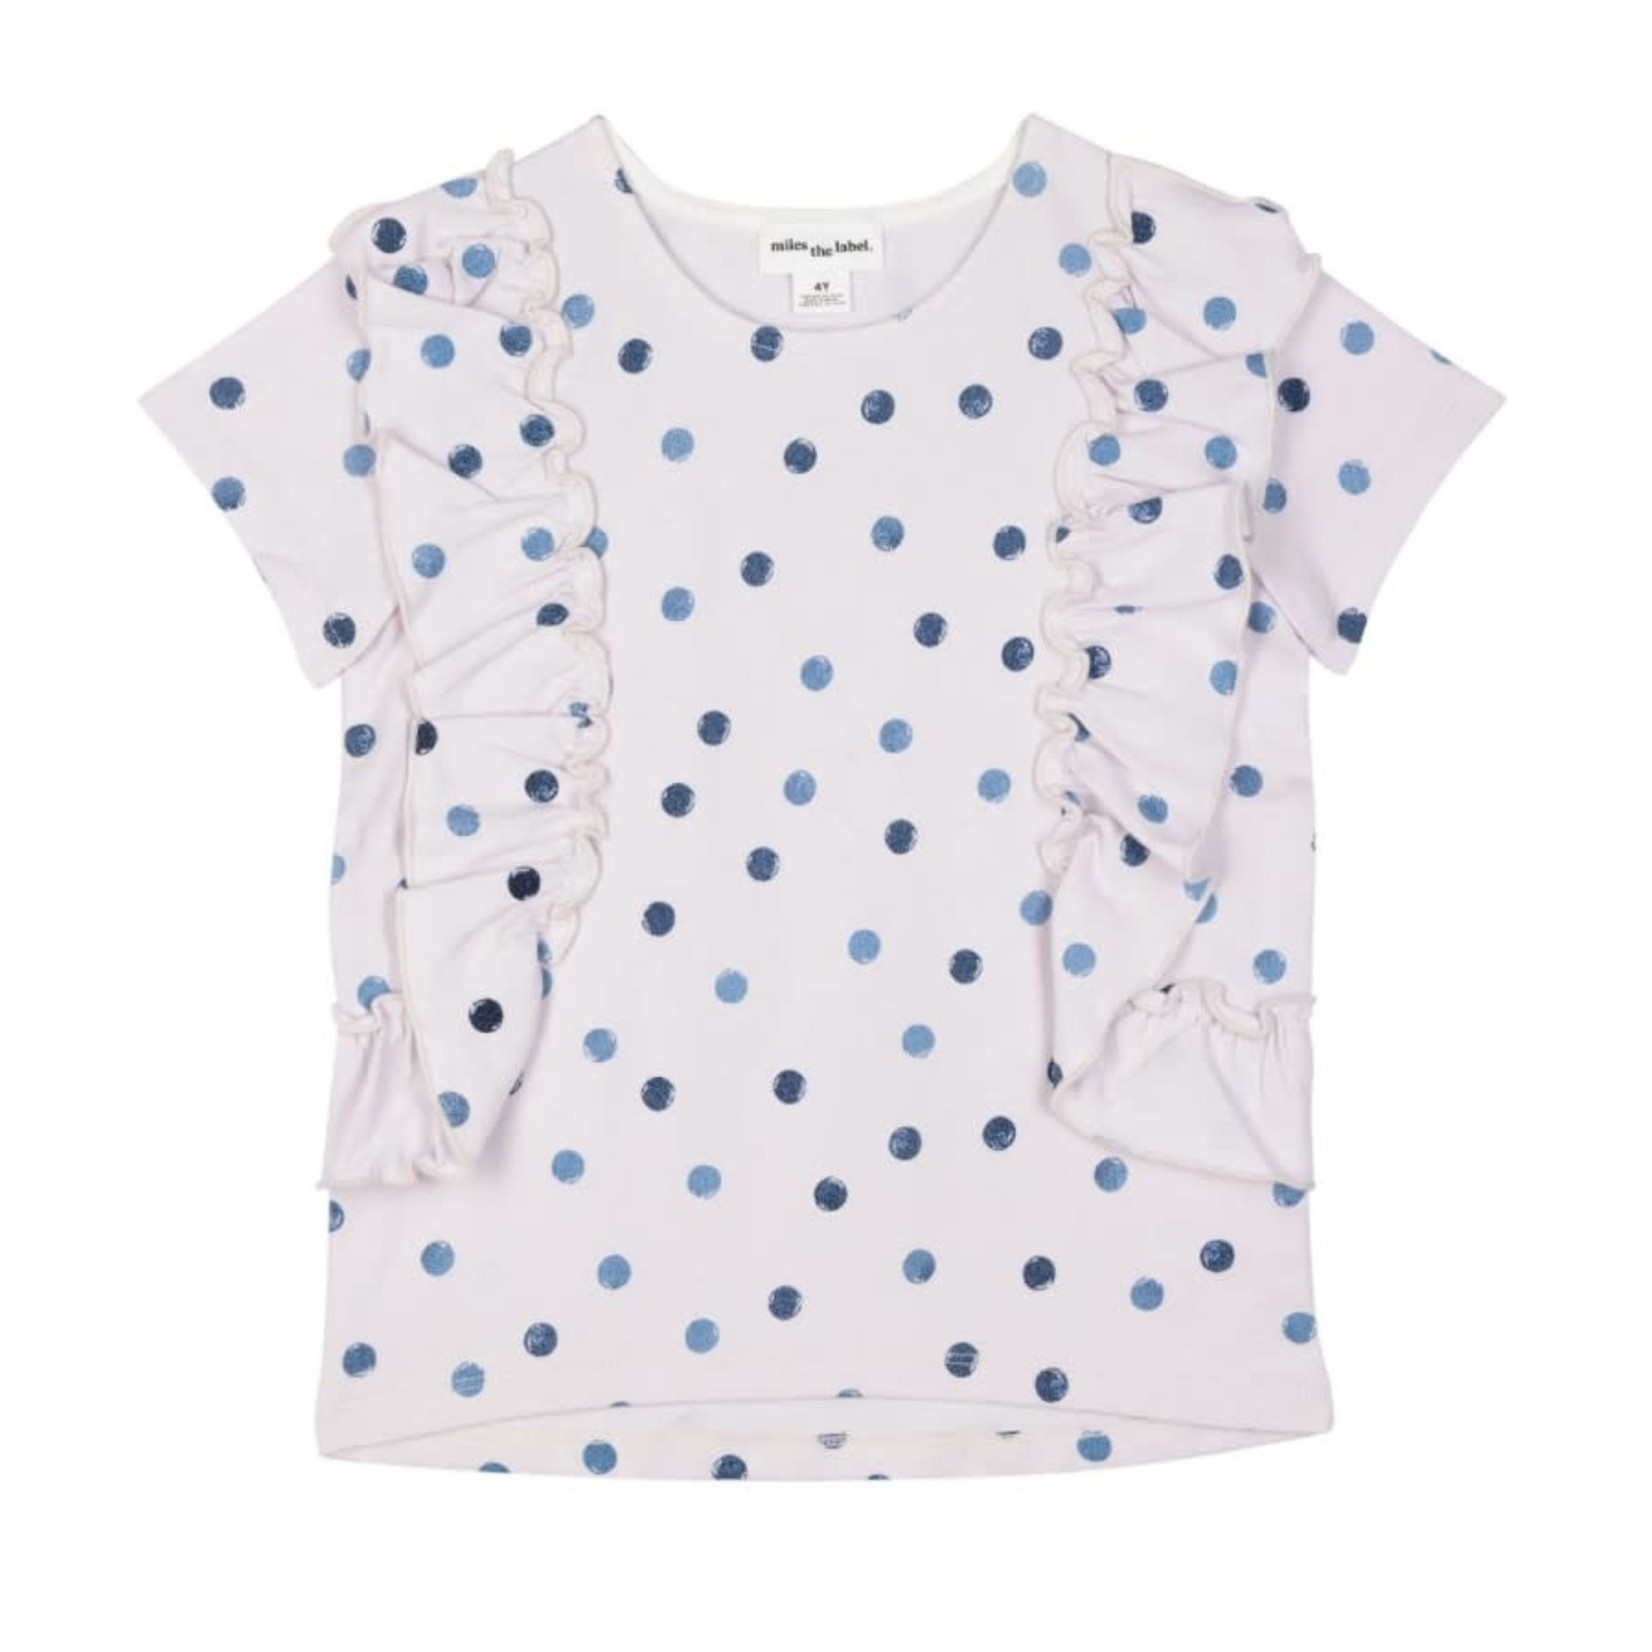 Miles the label MILES THE LABEL - Light pink t-shirt with blue polka dots and ruffles